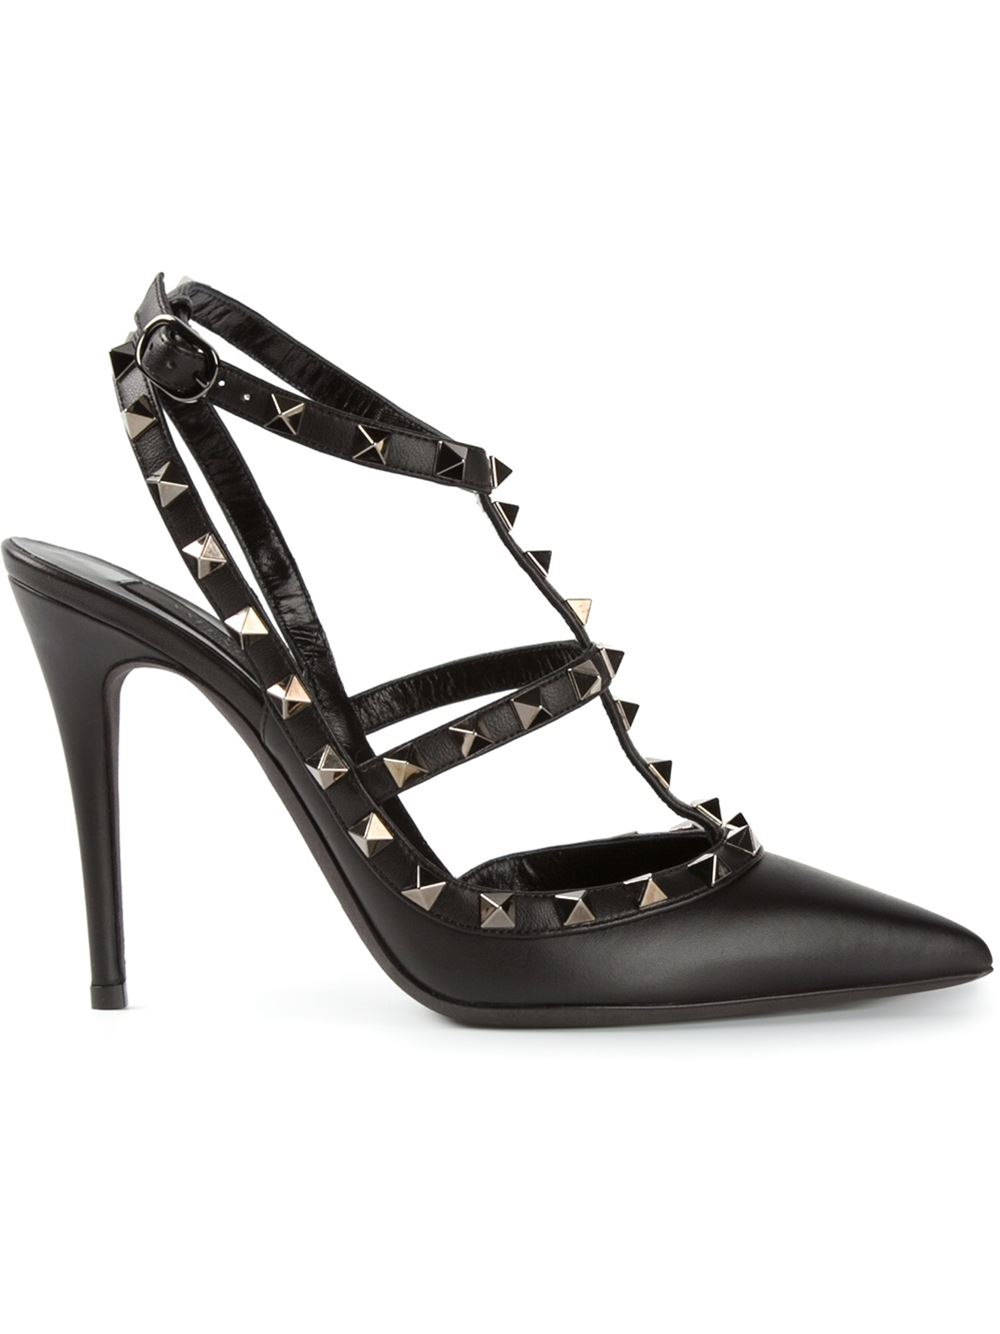 Lyst - Valentino Studded Pumps in Black